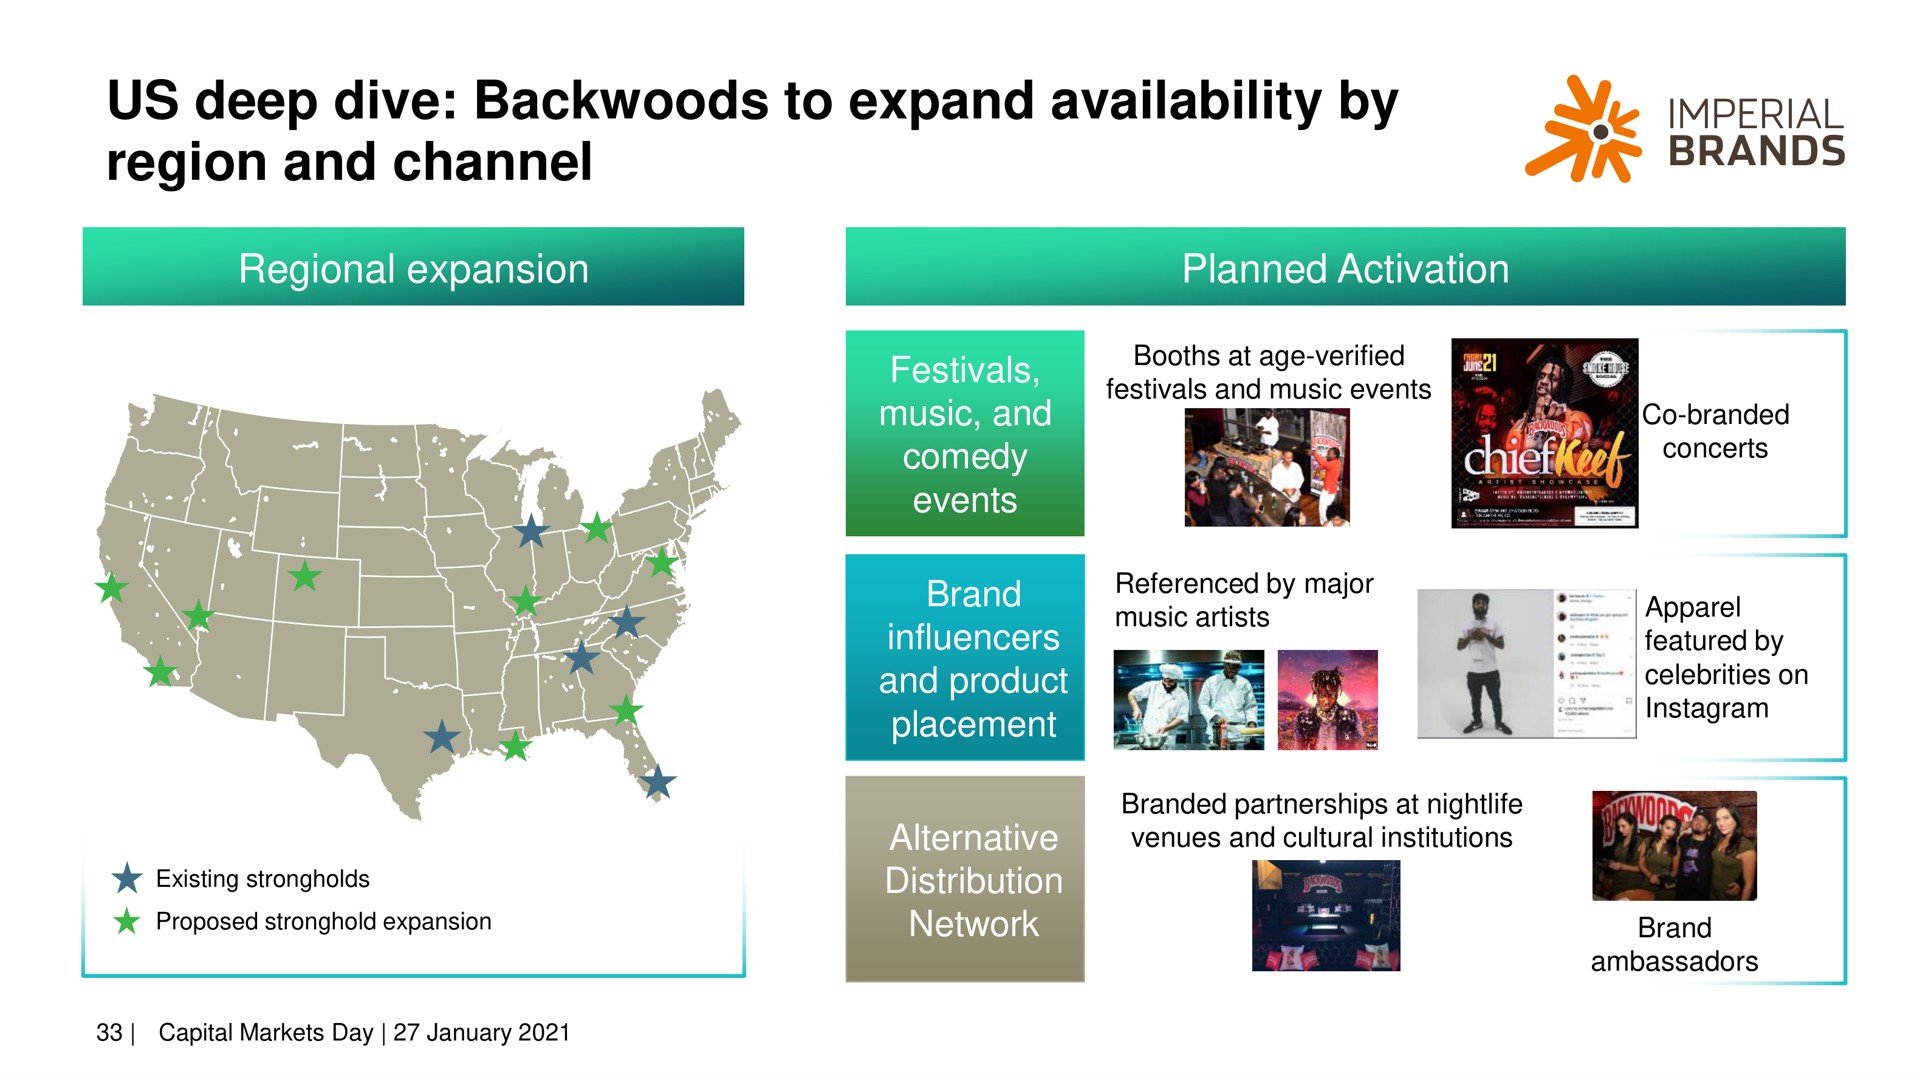 us deep dive backwoods to expand availability by region and channel me imperial an brands vee peers | Imperial Brands